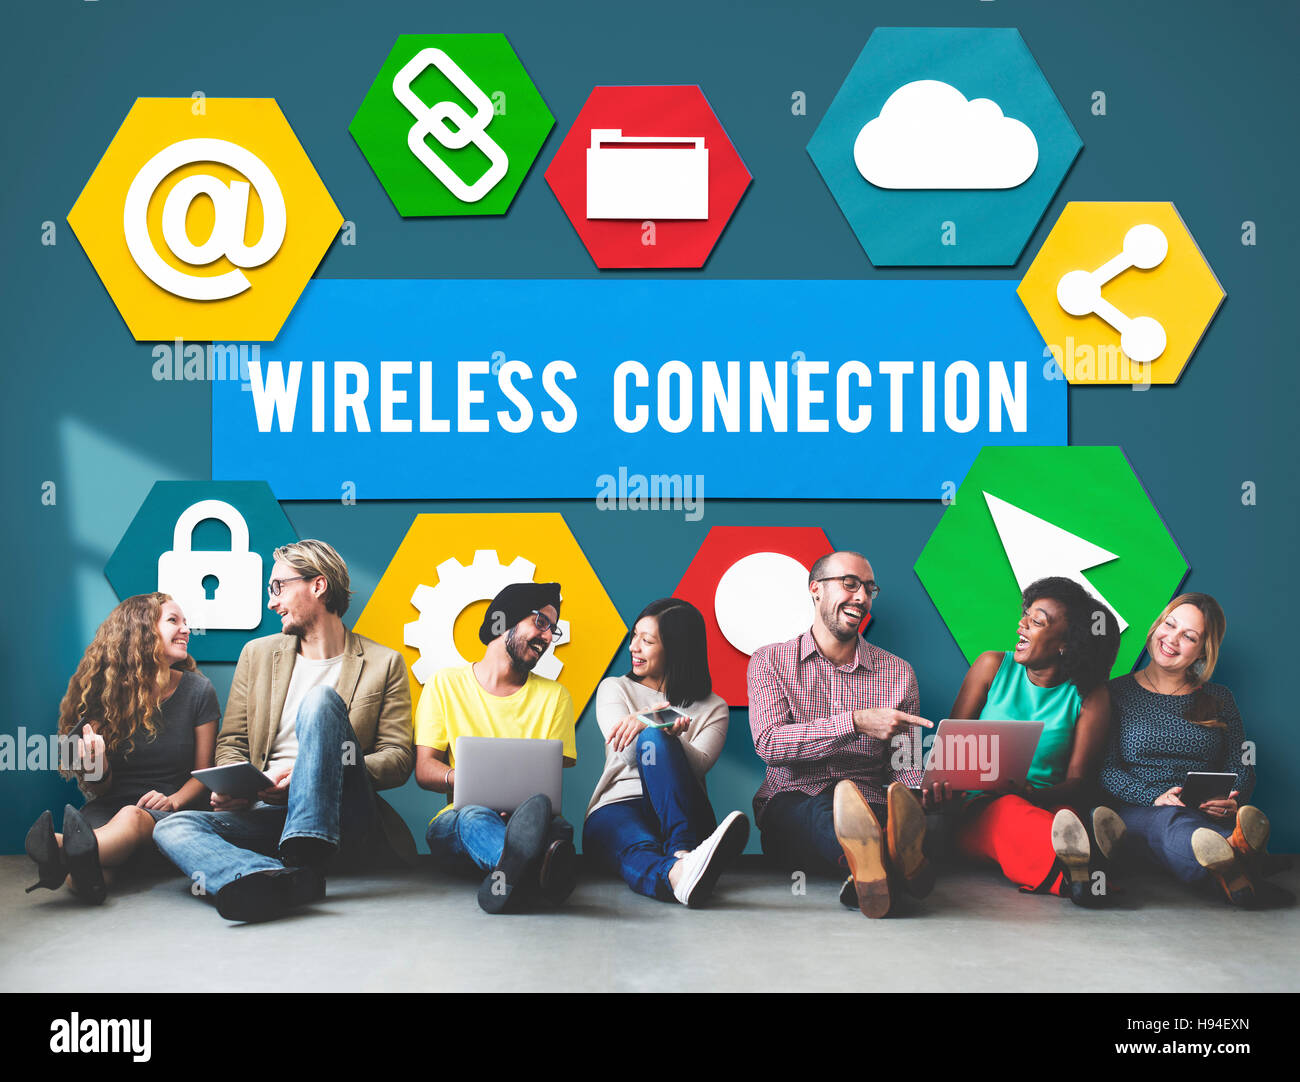 Wireless Signal Reception Mobility Graphic Concept Stock Photo